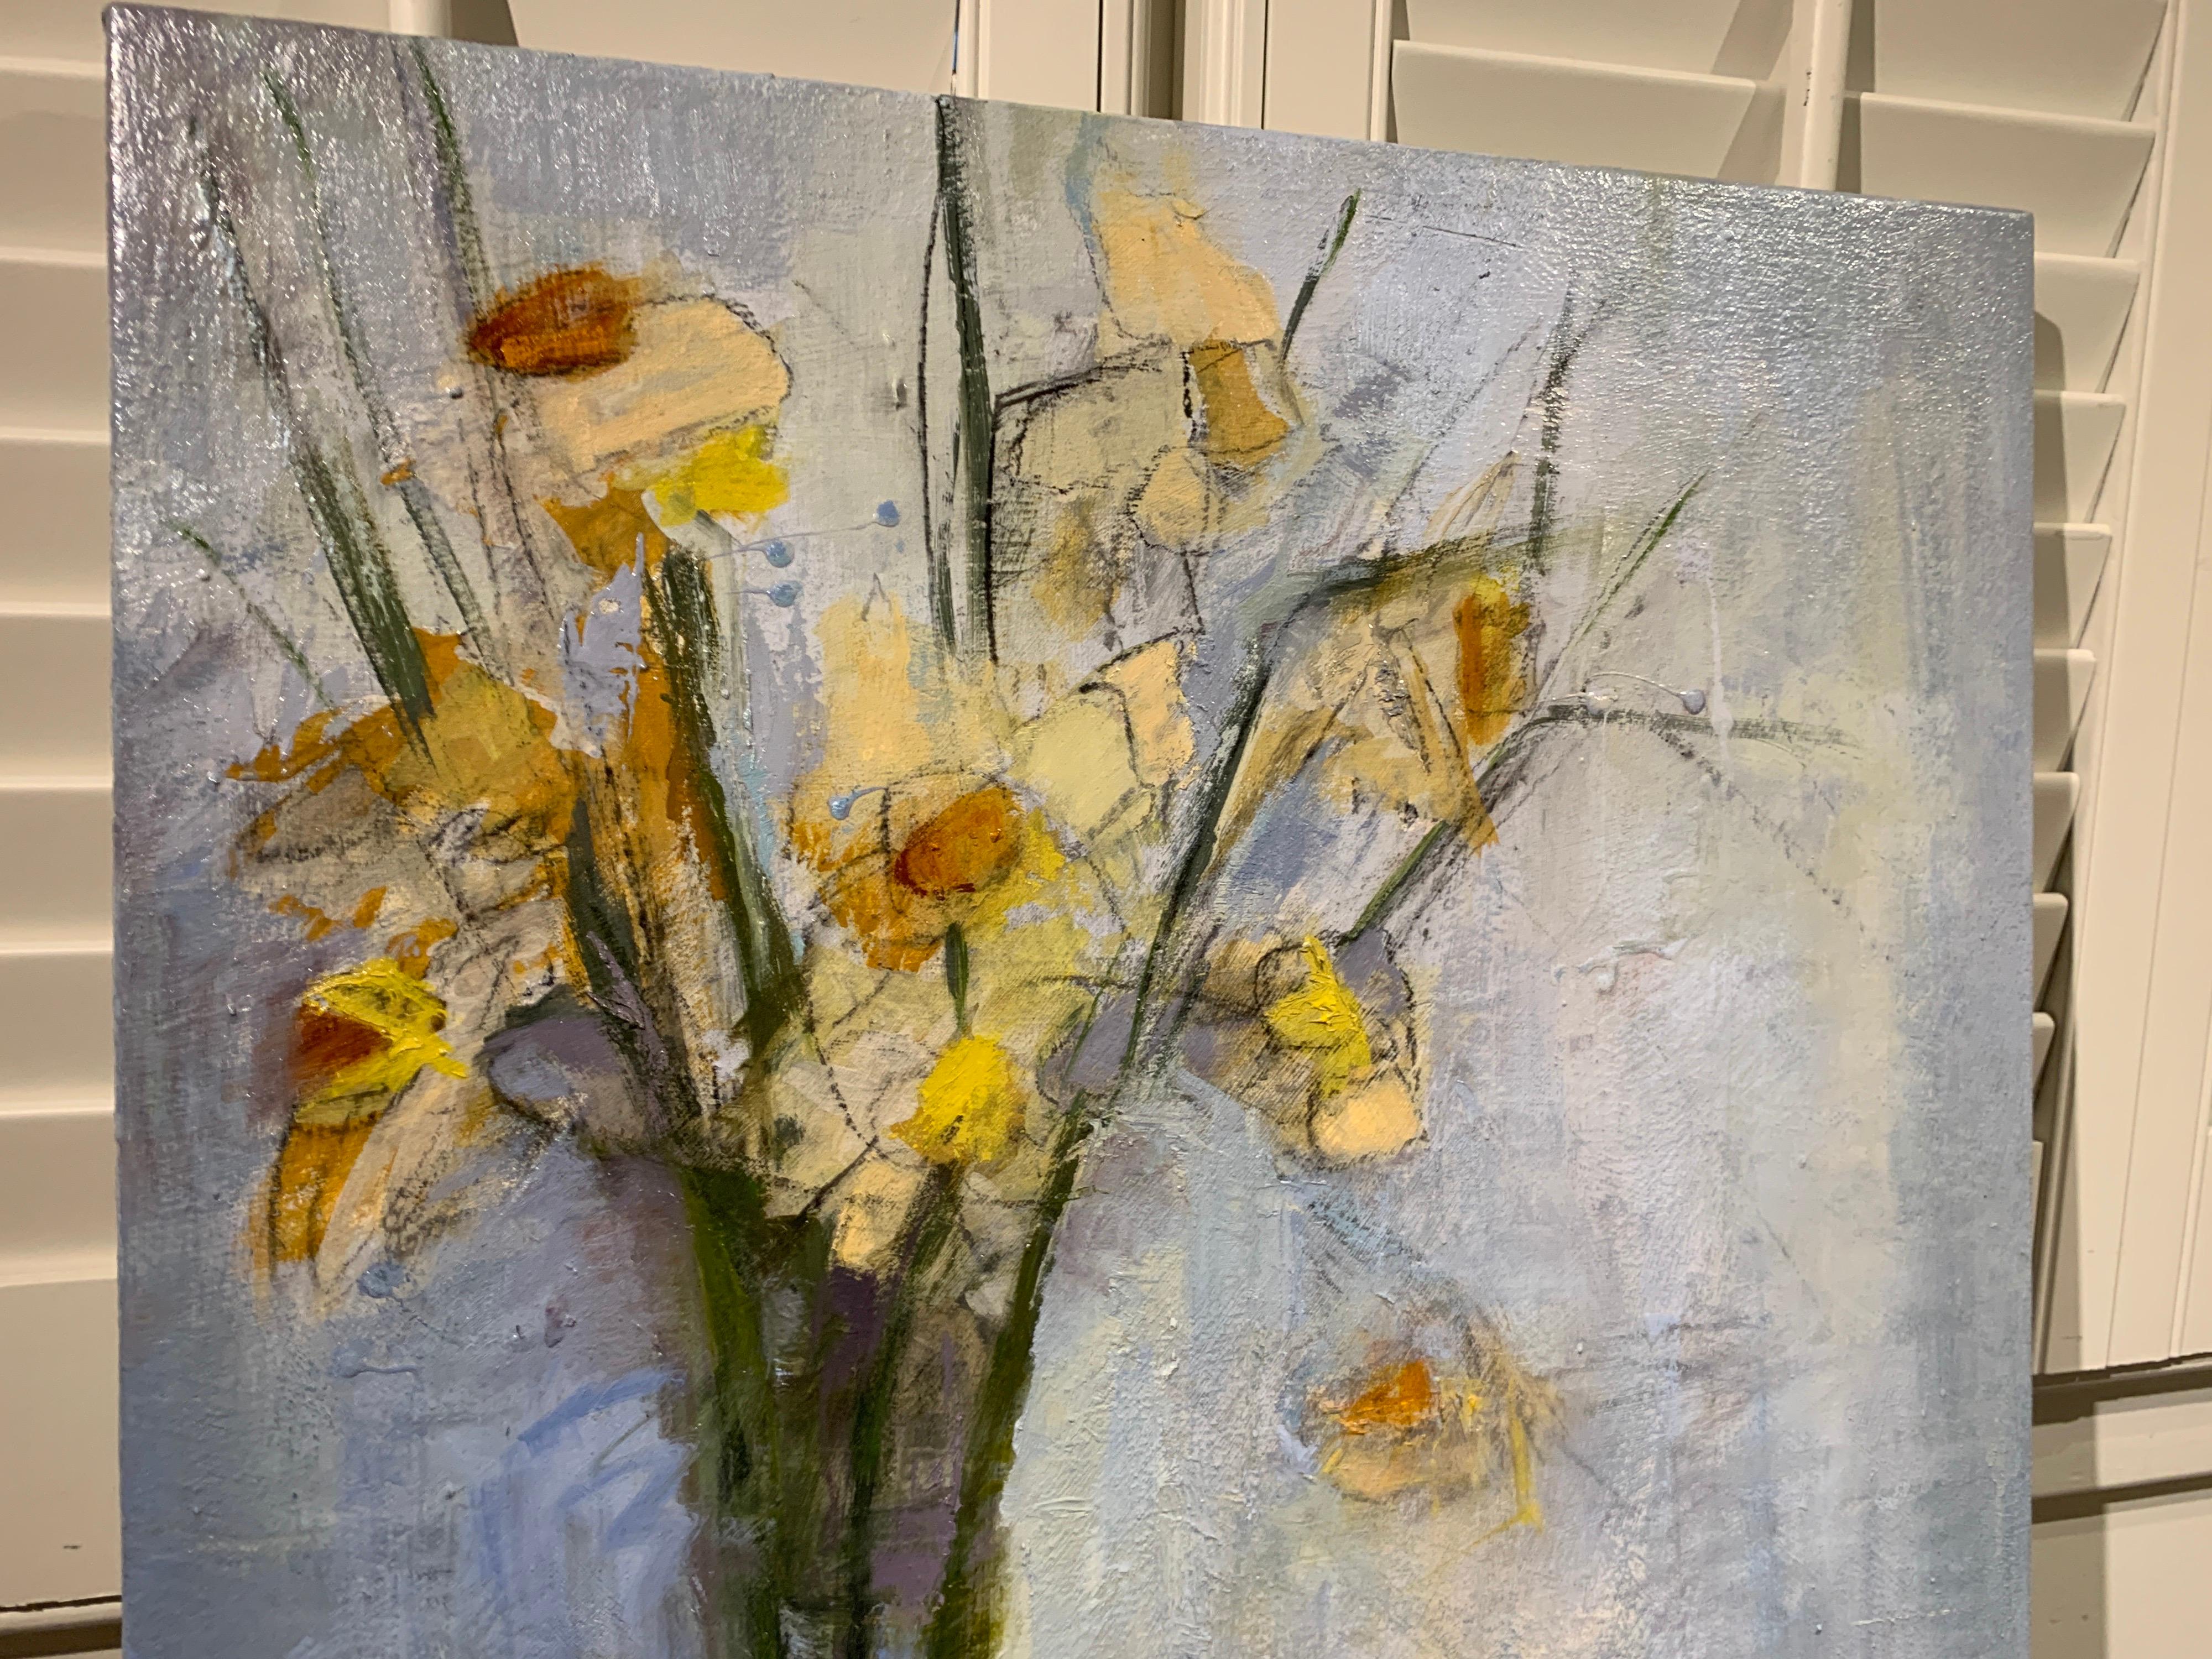 Daffodils from the Garden by Sharon Hockfield, Contemporary Floral Still Life 6